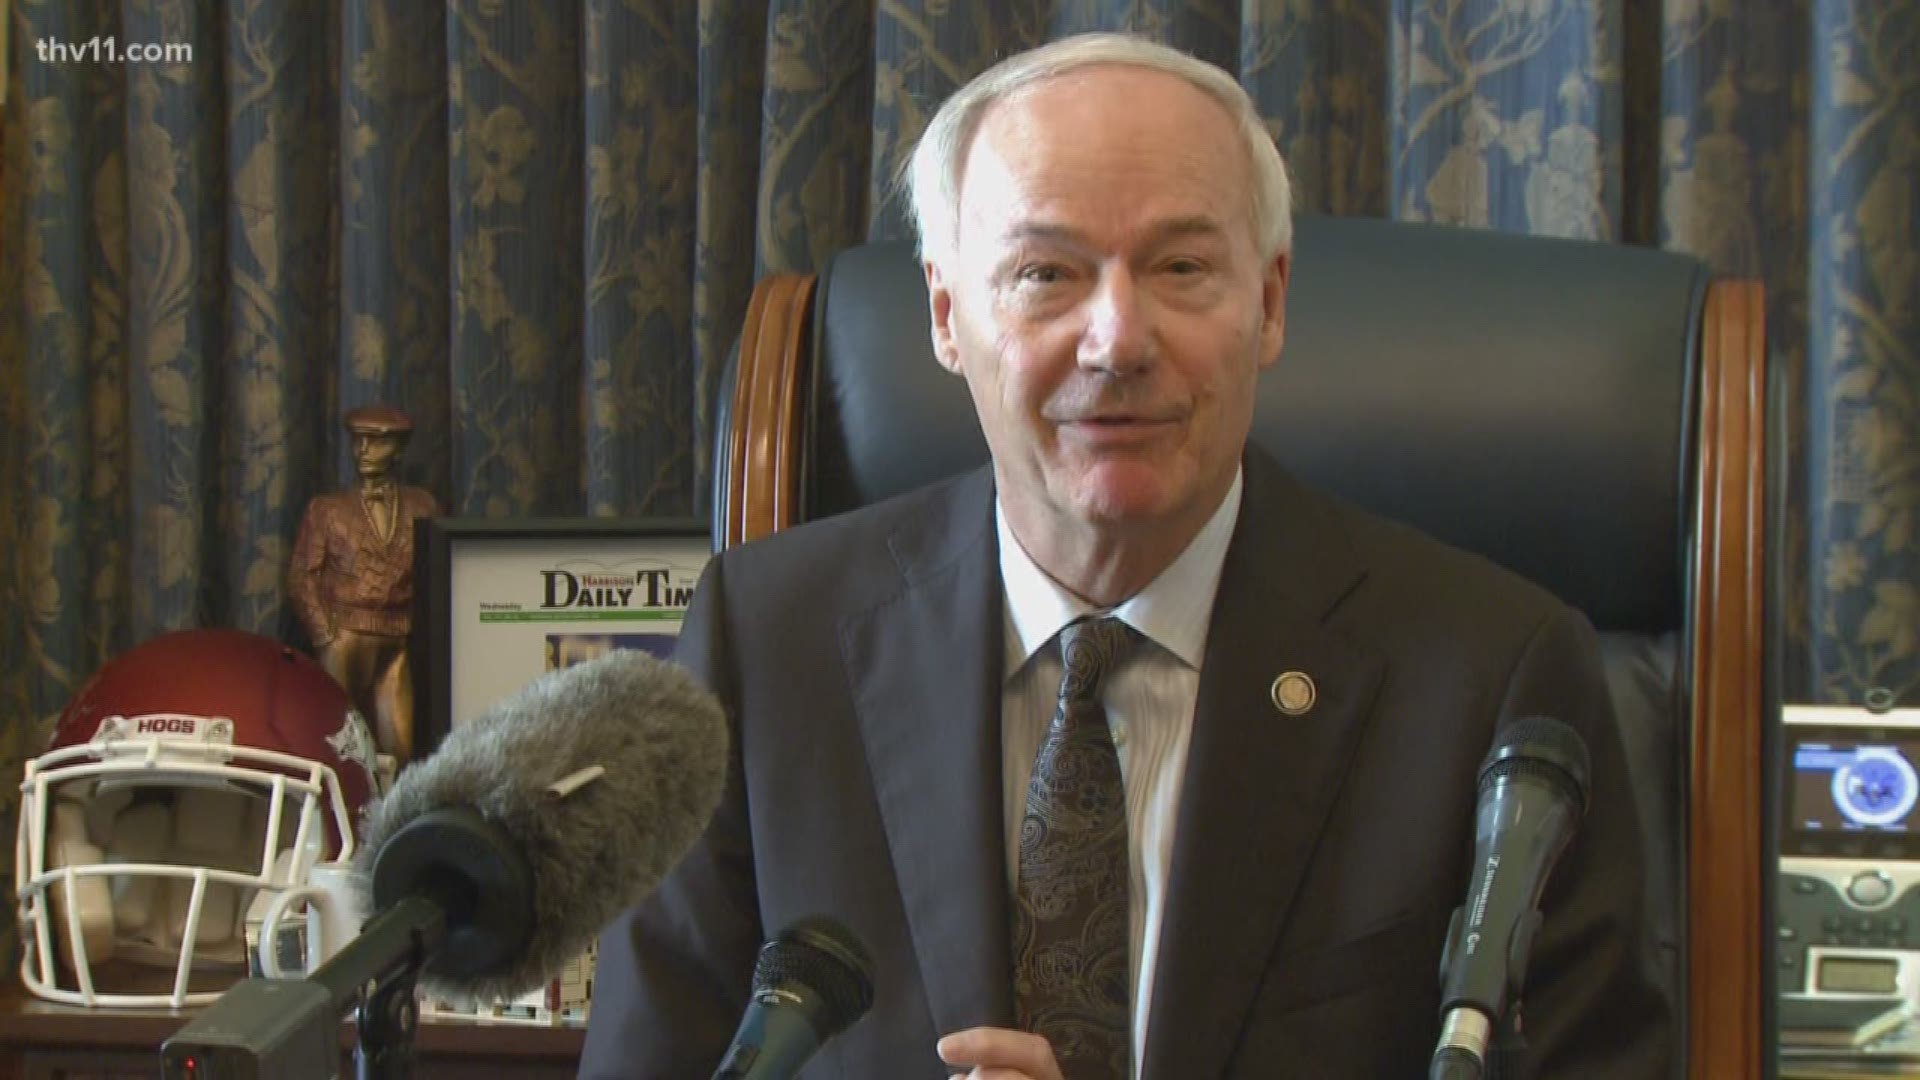 Governor Asa Hutchinson has appointed nearly every member of the State Board of Education. We heard his thoughts on that board's plans for LRSD.